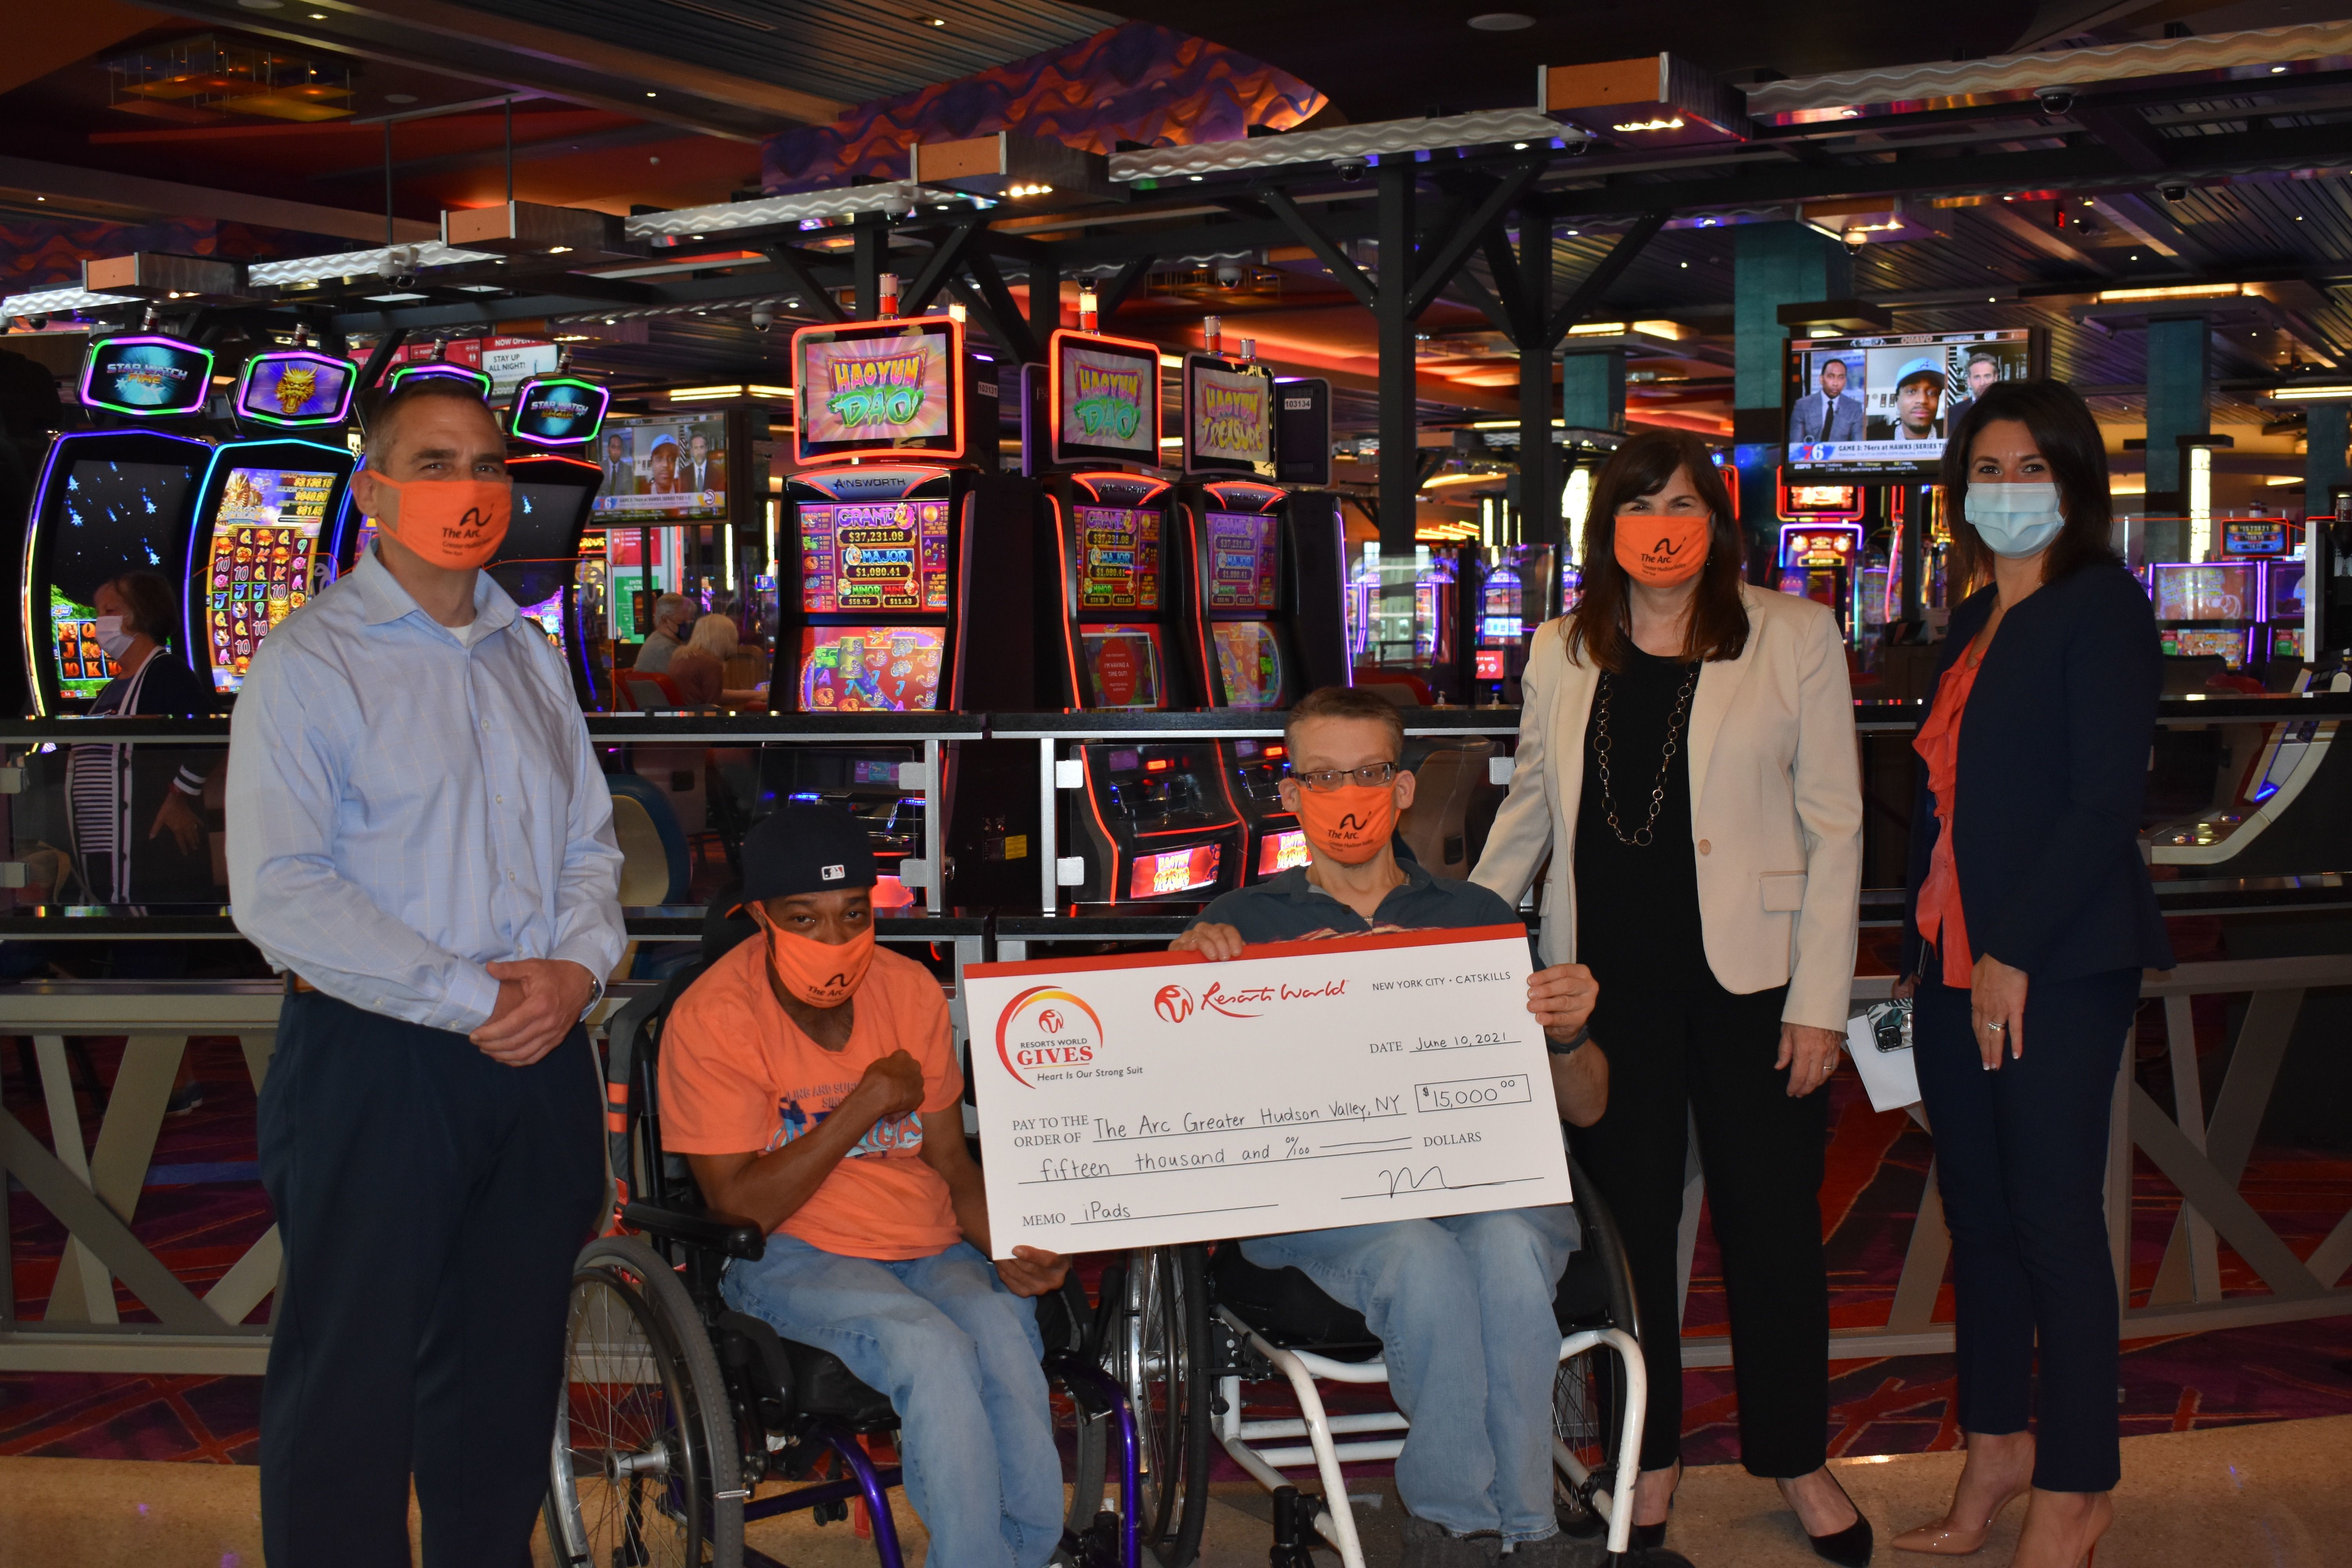 Resorts World Catskills Presents $15,000 Donation to The Arc Greater Hudson Valley